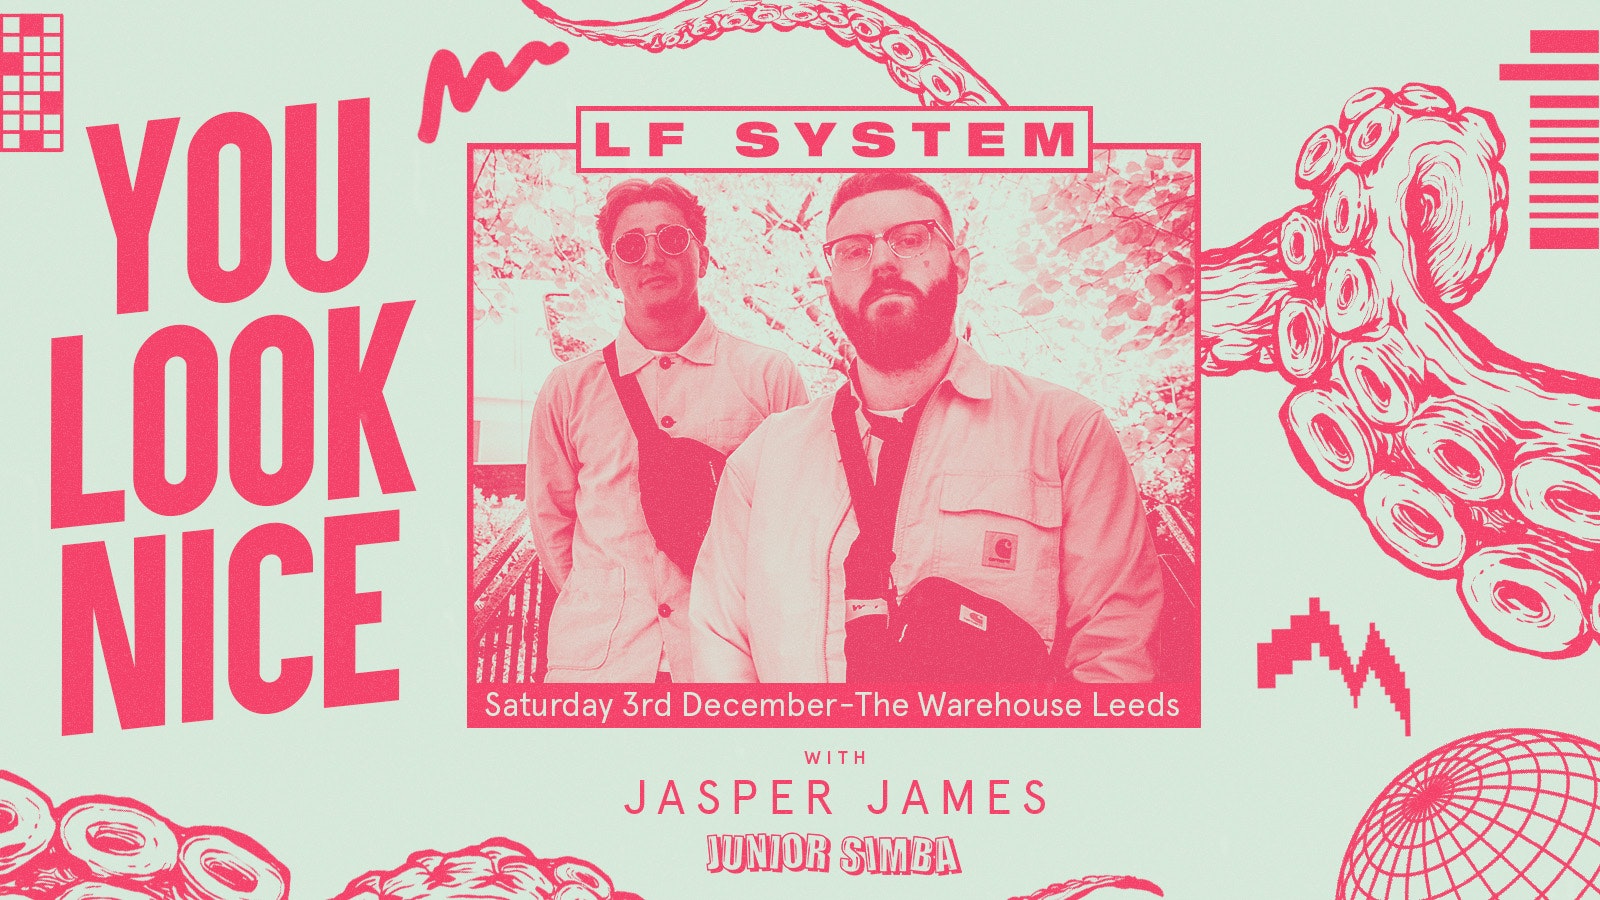 You Look Nice: LF System – Final 20 Tickets